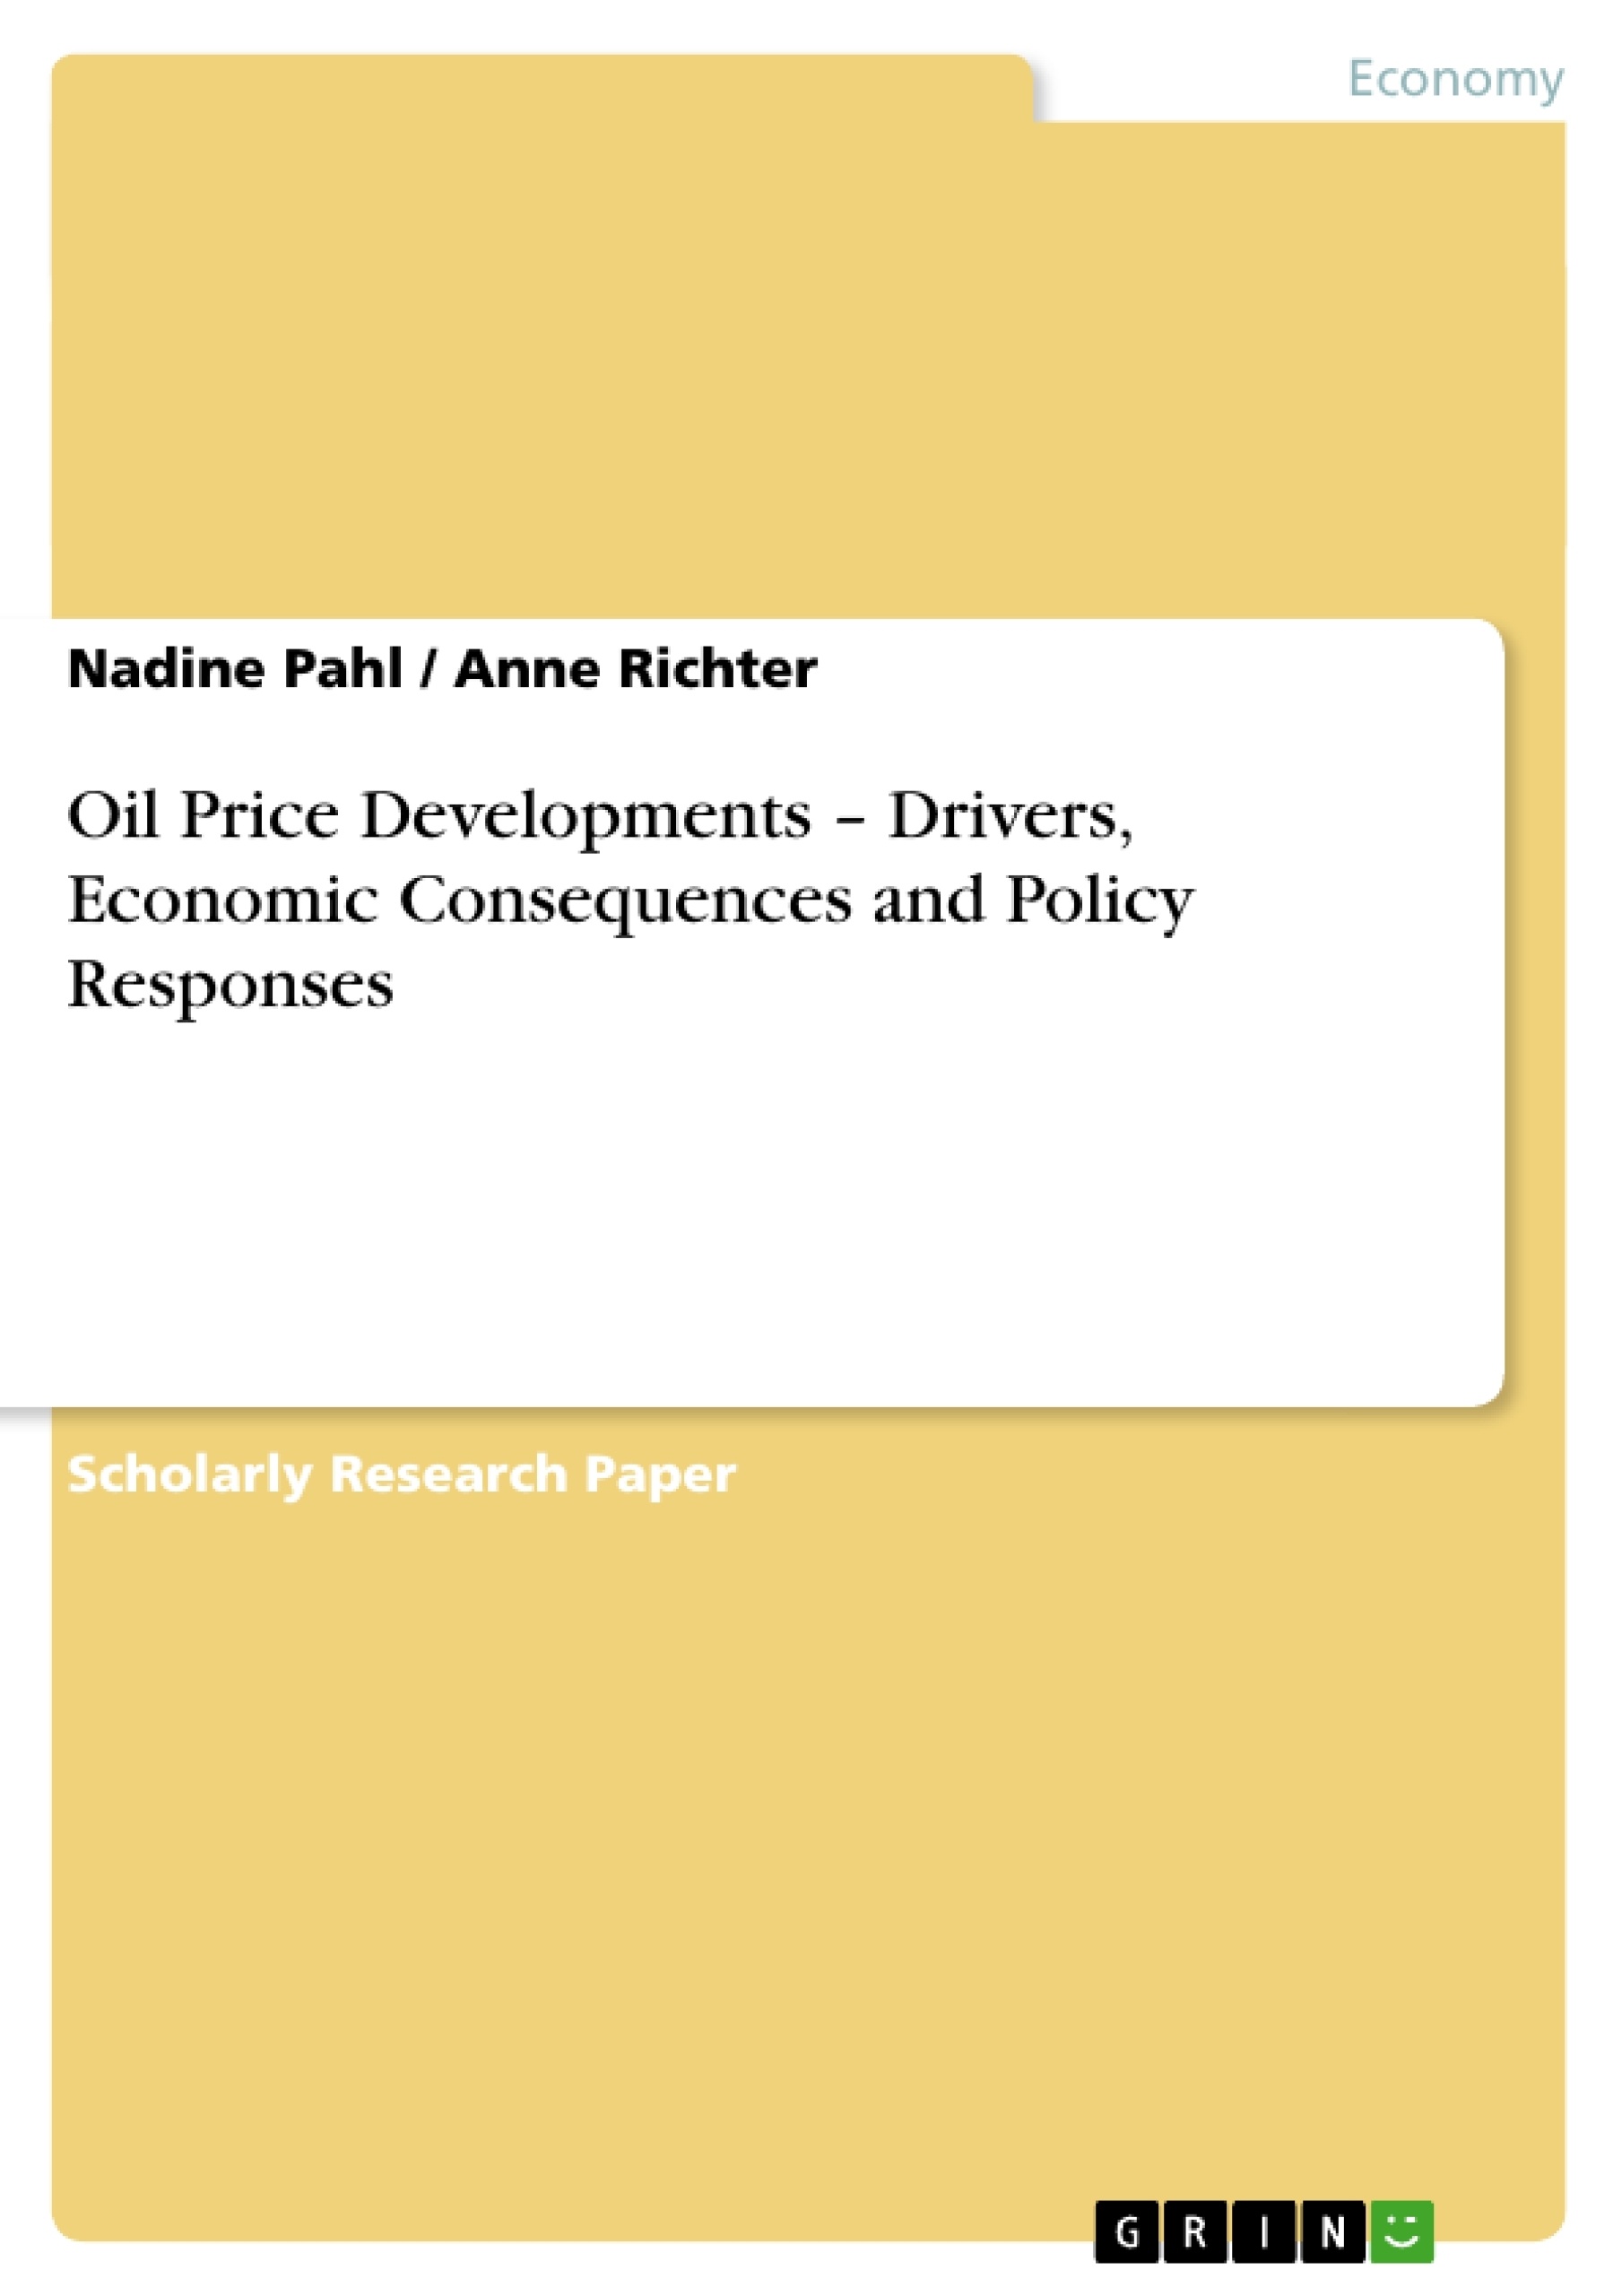 Title: Oil Price Developments – Drivers, Economic Consequences and Policy Responses